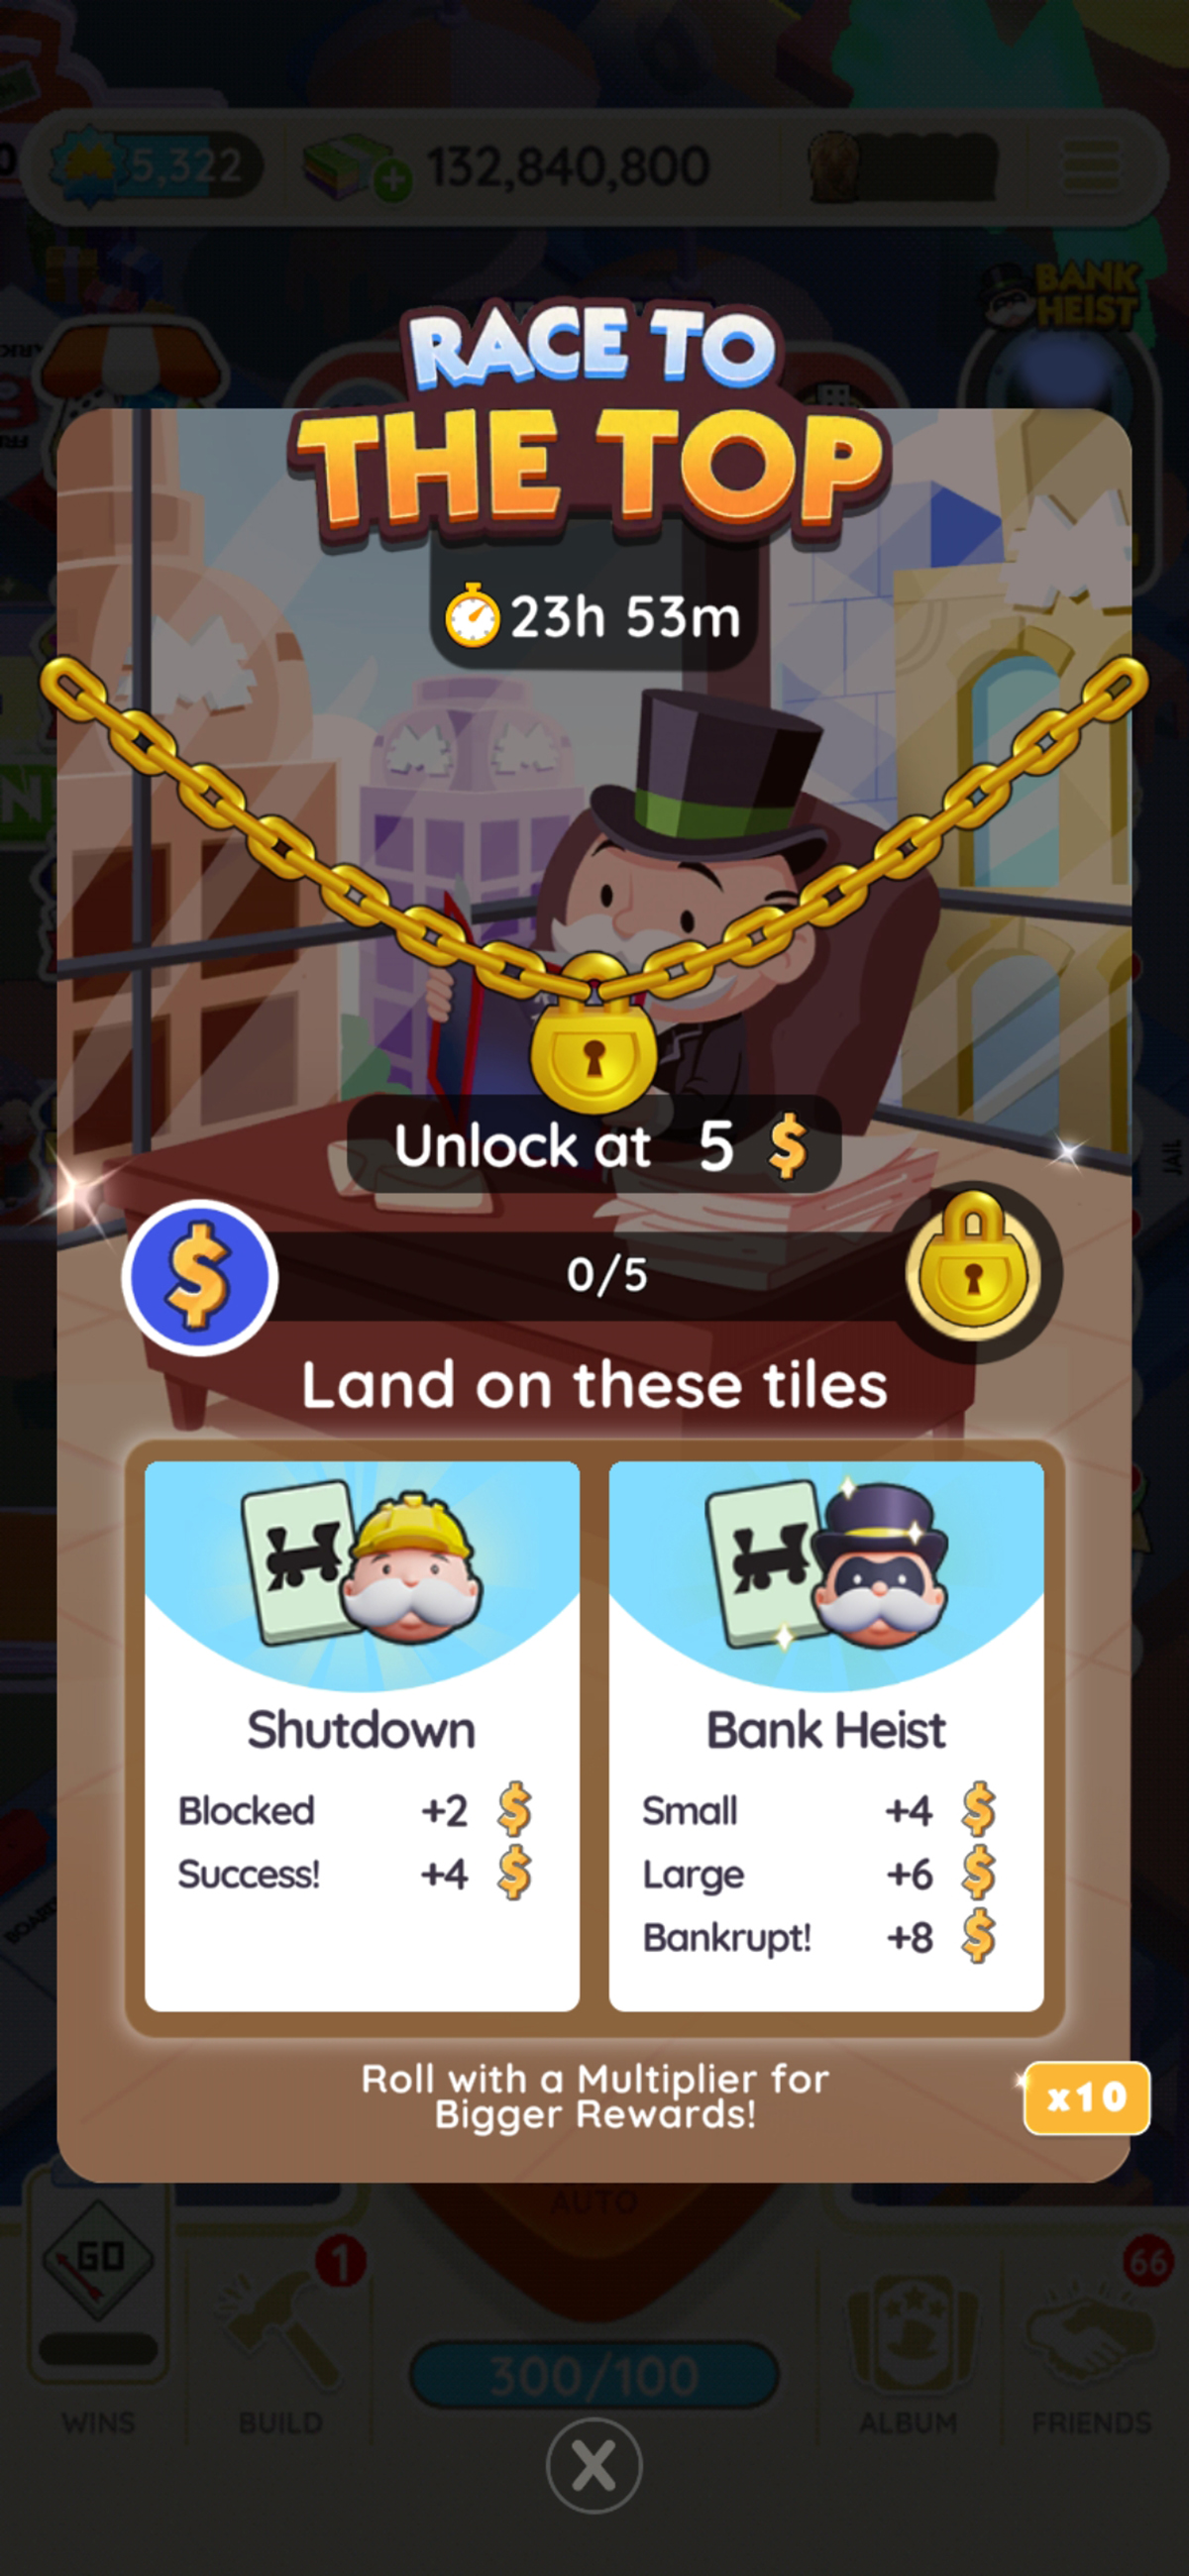 A header image for the Race to the Top tournament in Monopoly GO that shows the logo for the tournament and the time remaining.  The image is part of a list of all the rewards and milestones that are part of the Race to the Top event in Monopoly GO